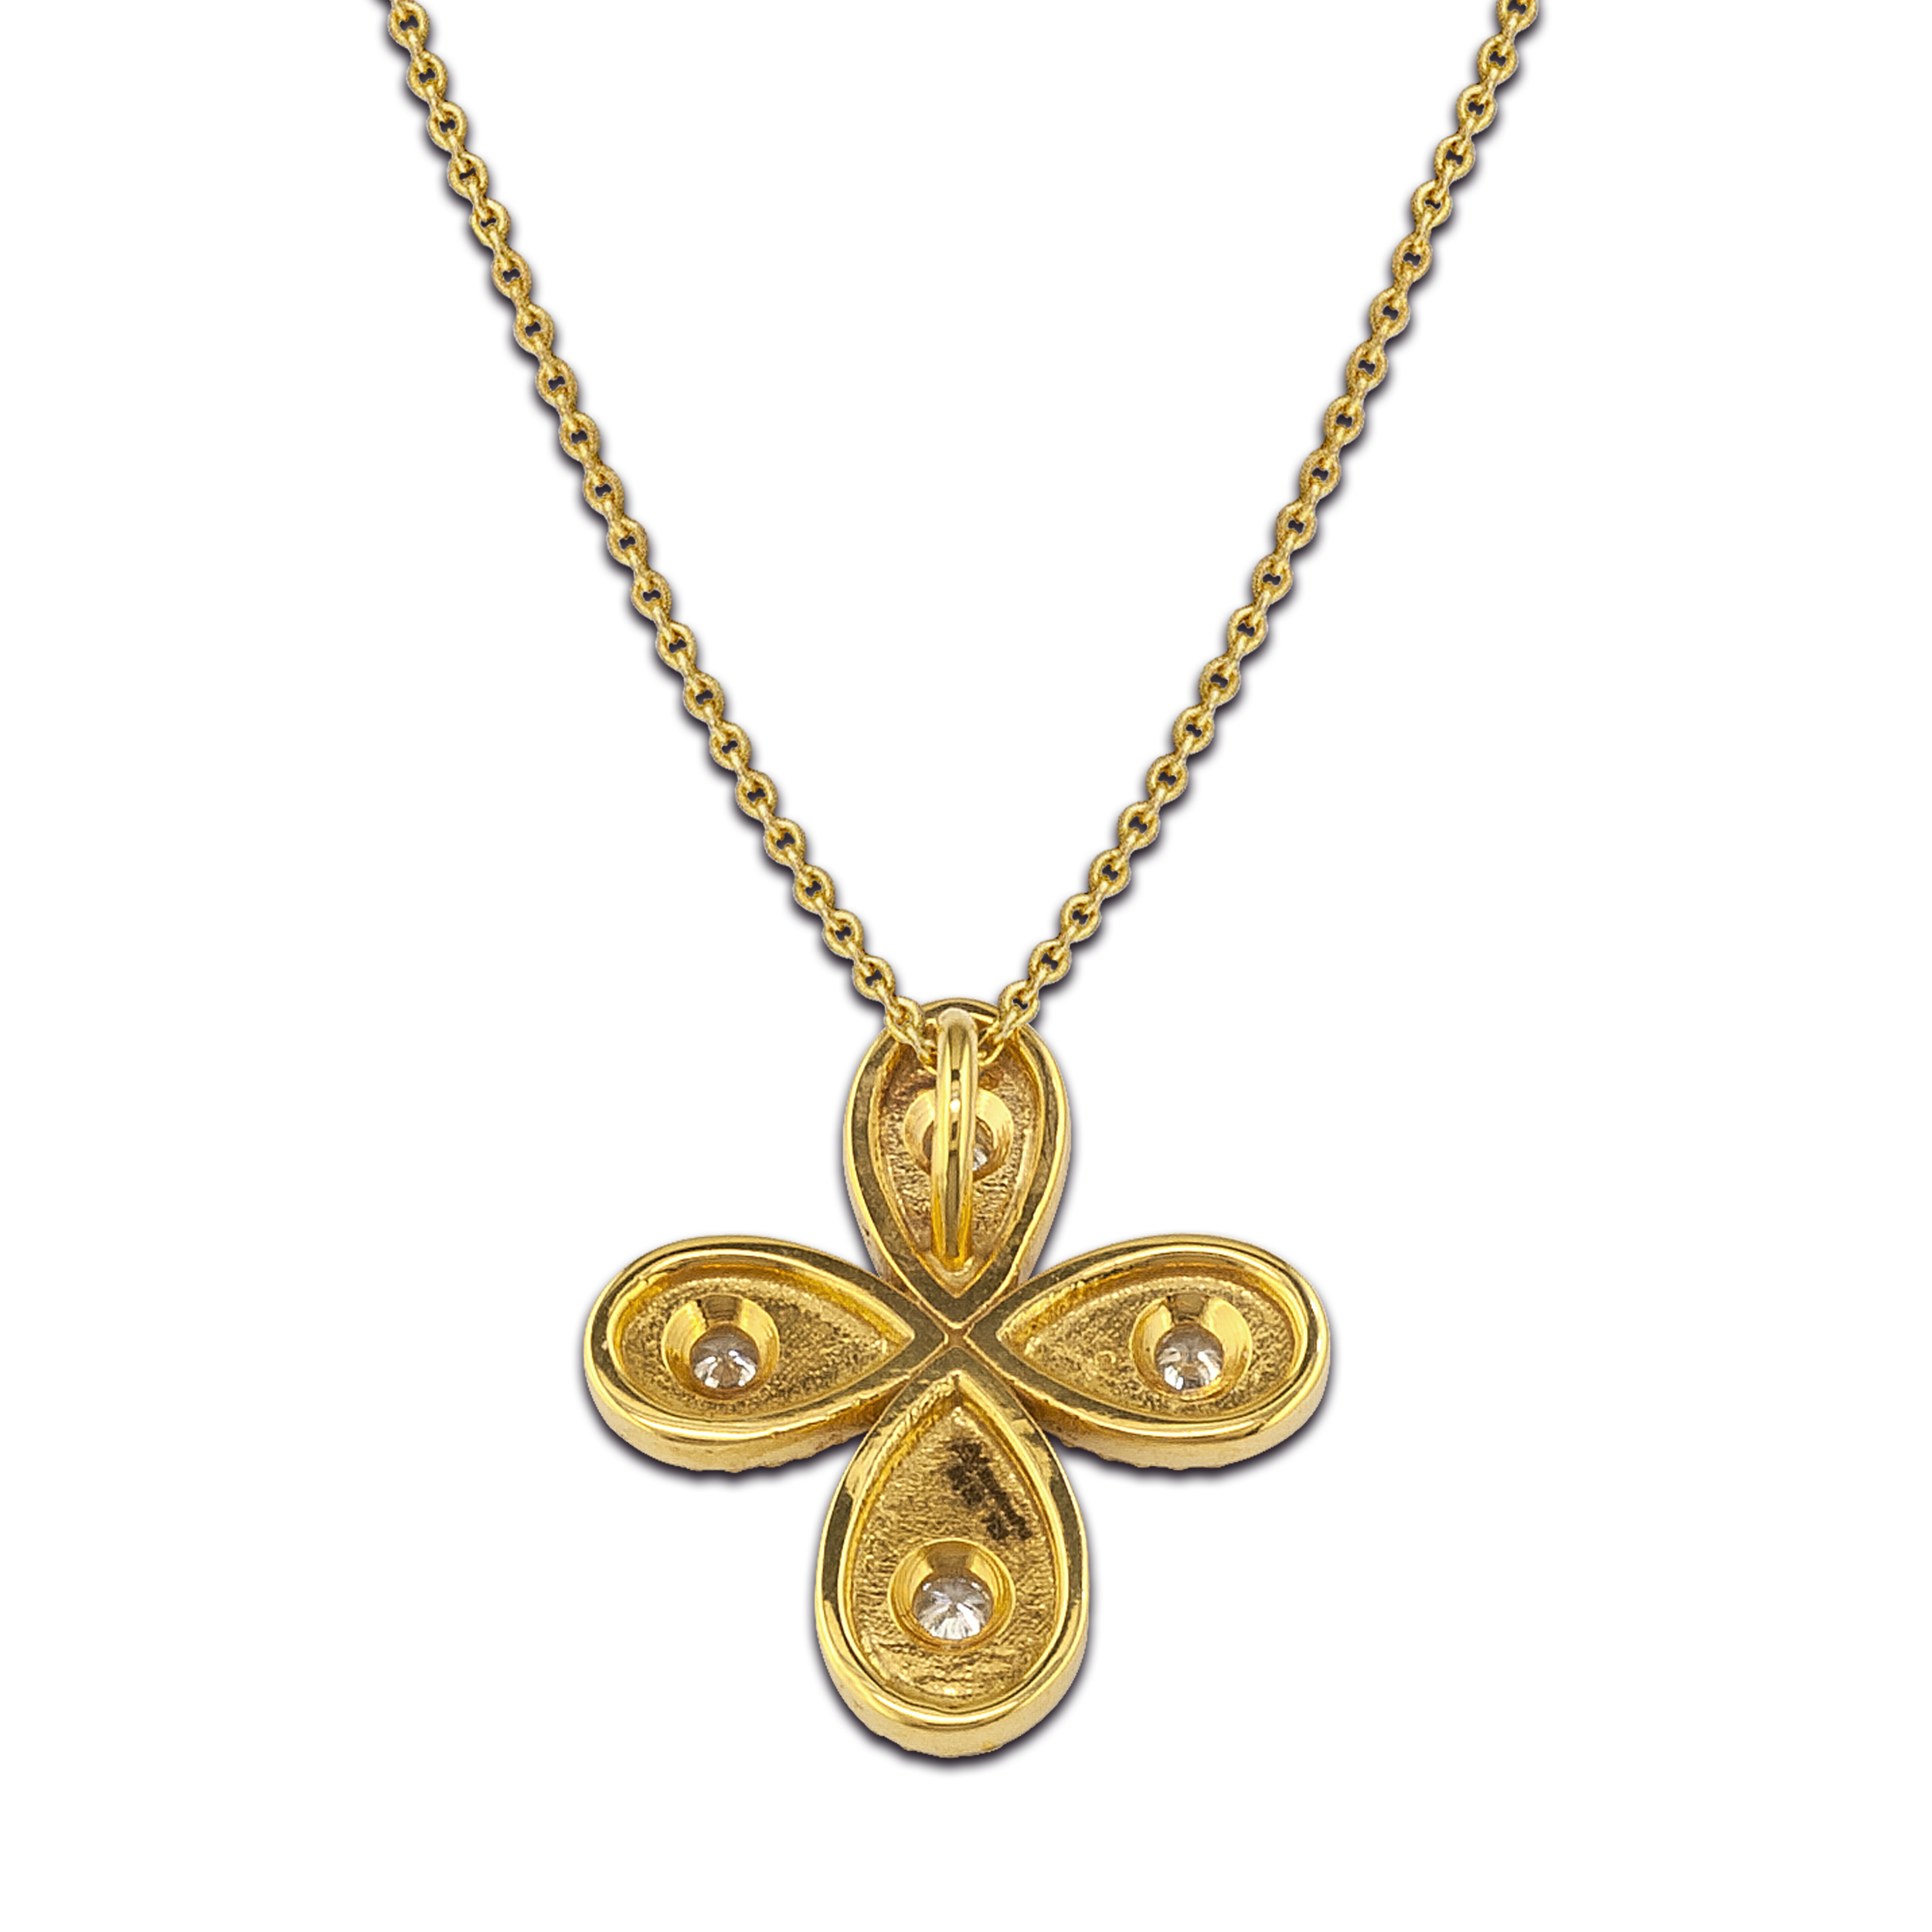 Oval geometric cross made from gold and diamonds